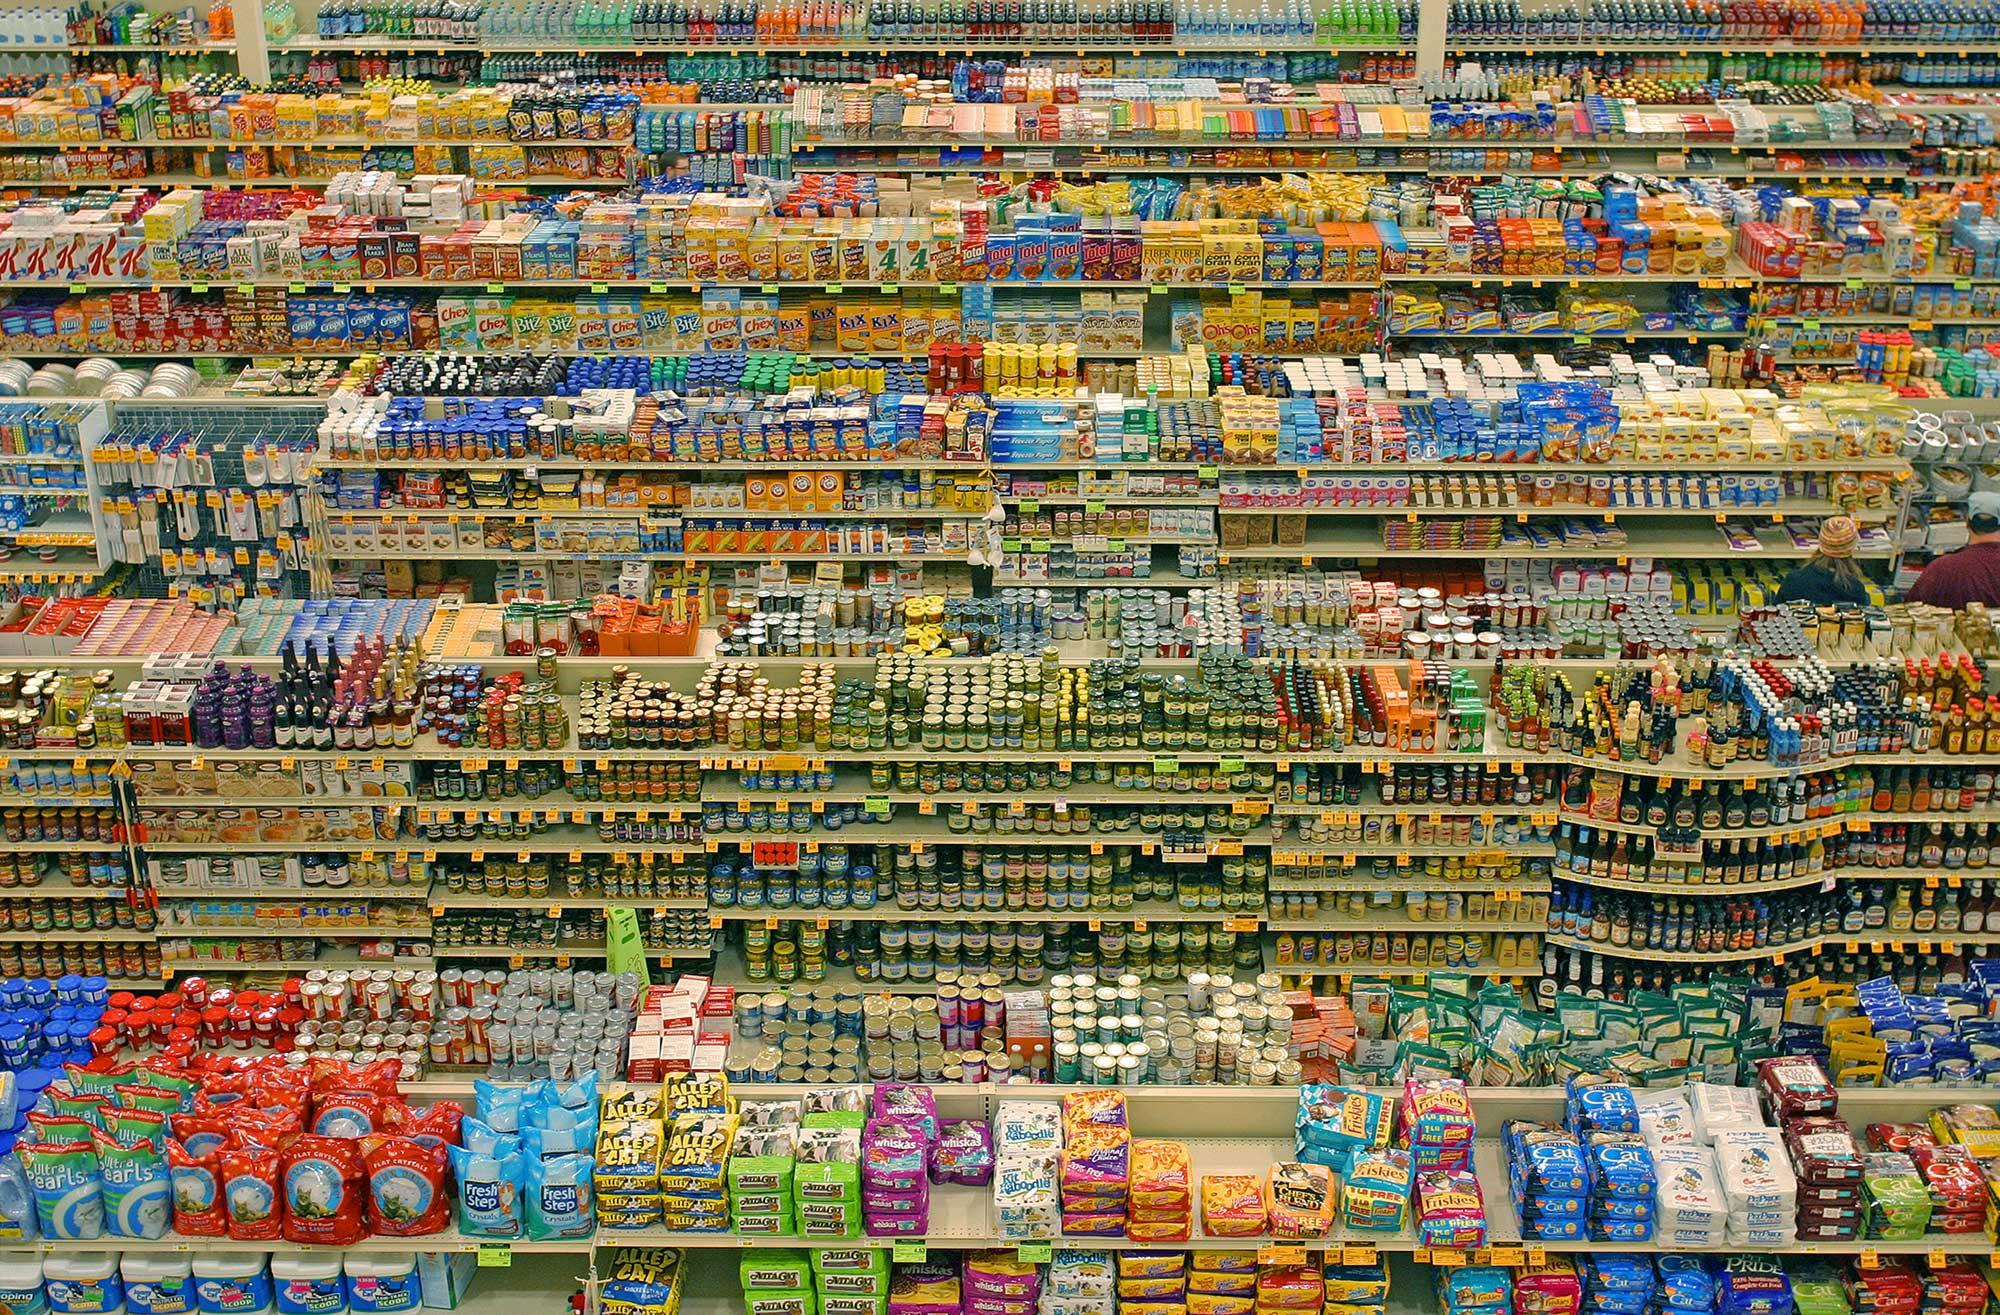 view from above across the aisles of fully stocked shelves in a supermarket 